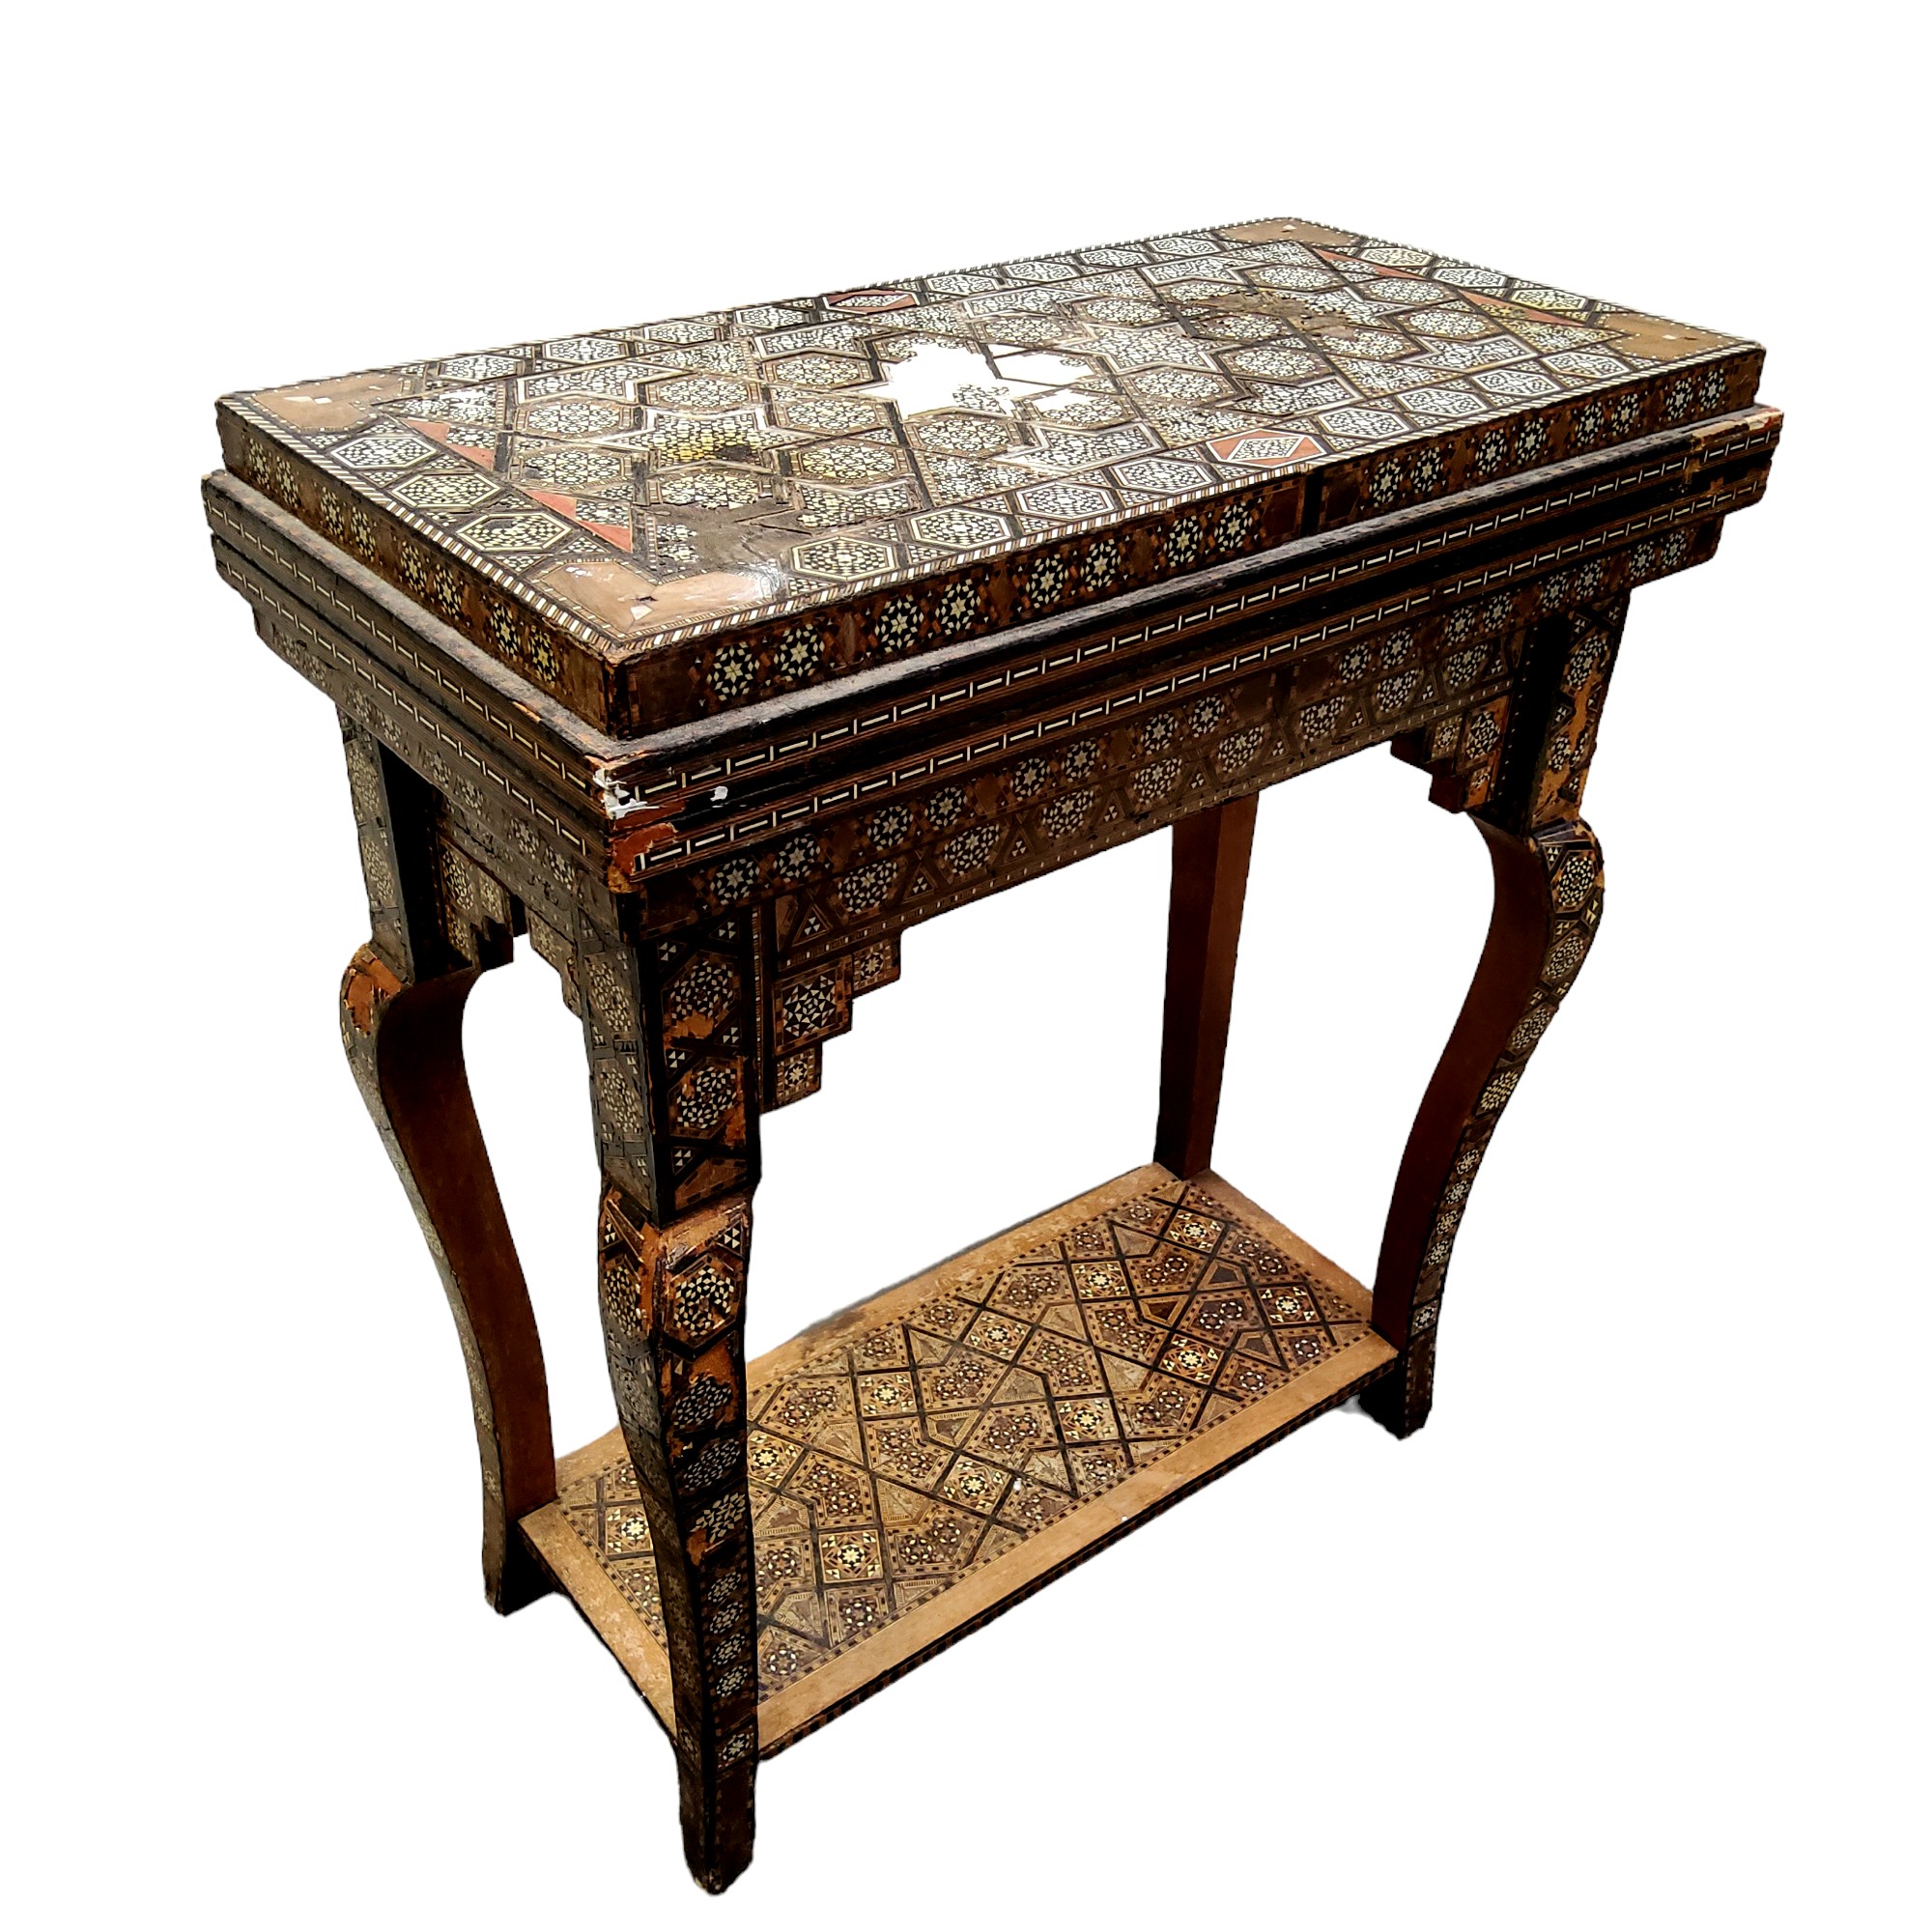 A 19th century Anglo Indian games compendium, the folding vizagapatam/micromosaic inset table - Image 5 of 7